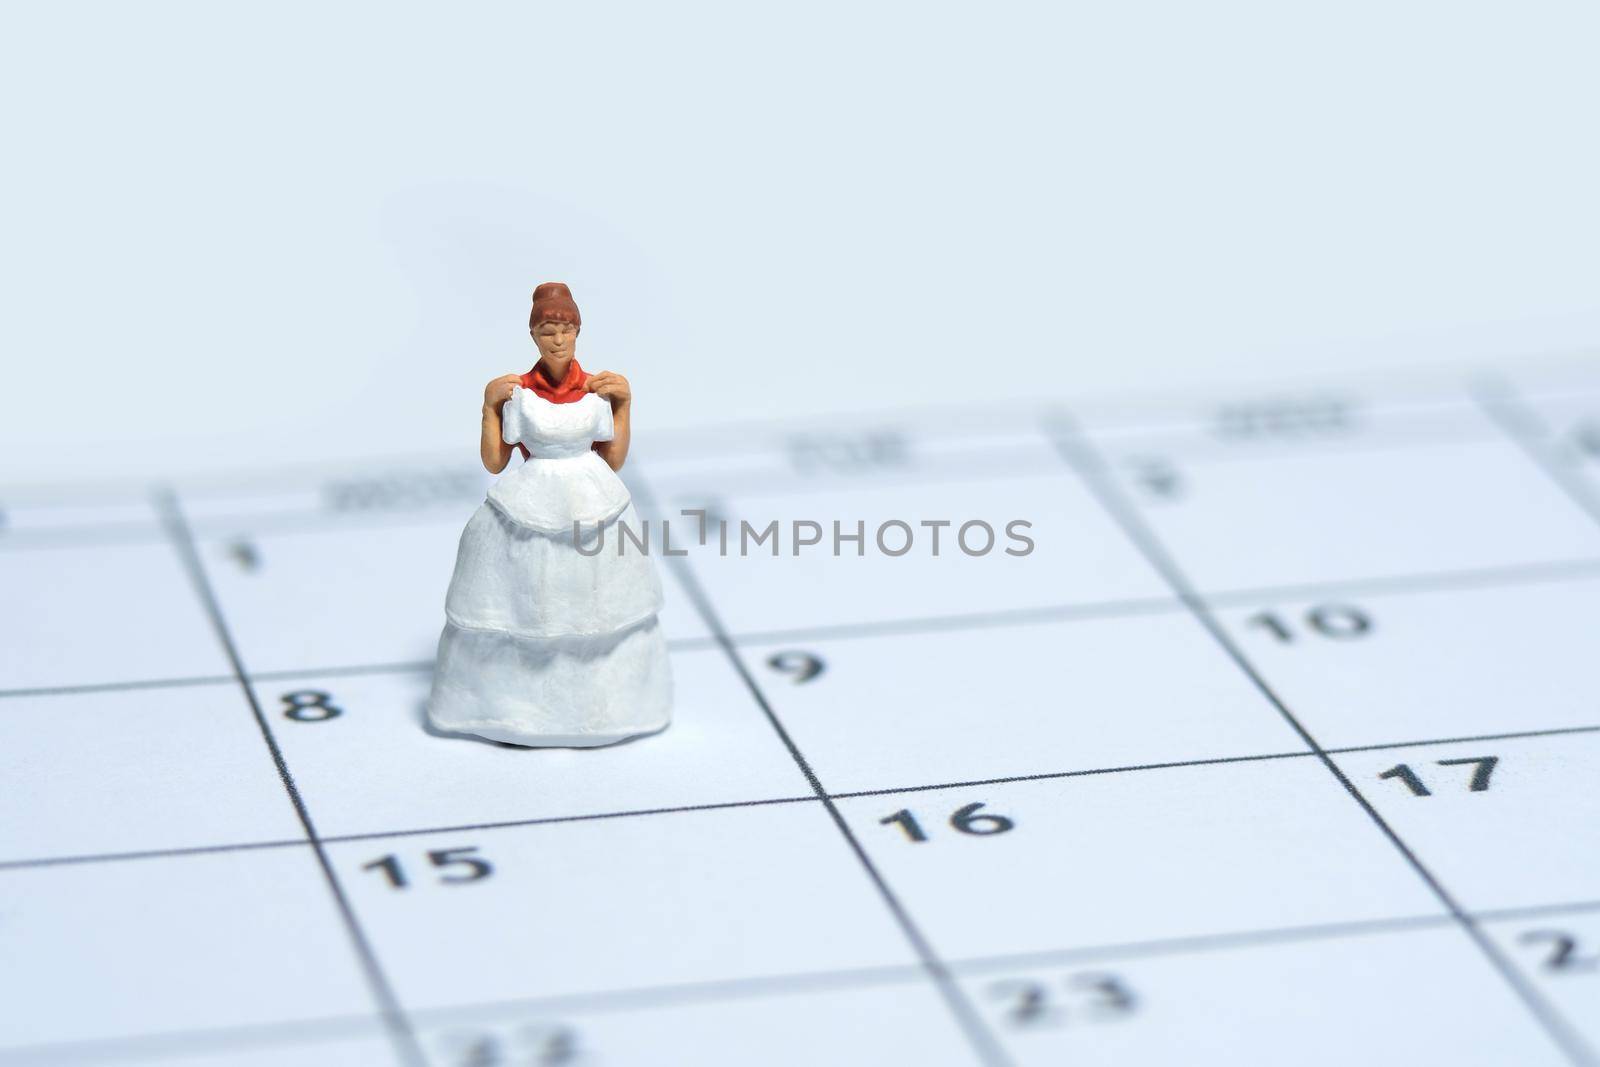 Woman miniature people stand above calendar while holding wedding dress, fitting day concept. Image photo by Macrostud